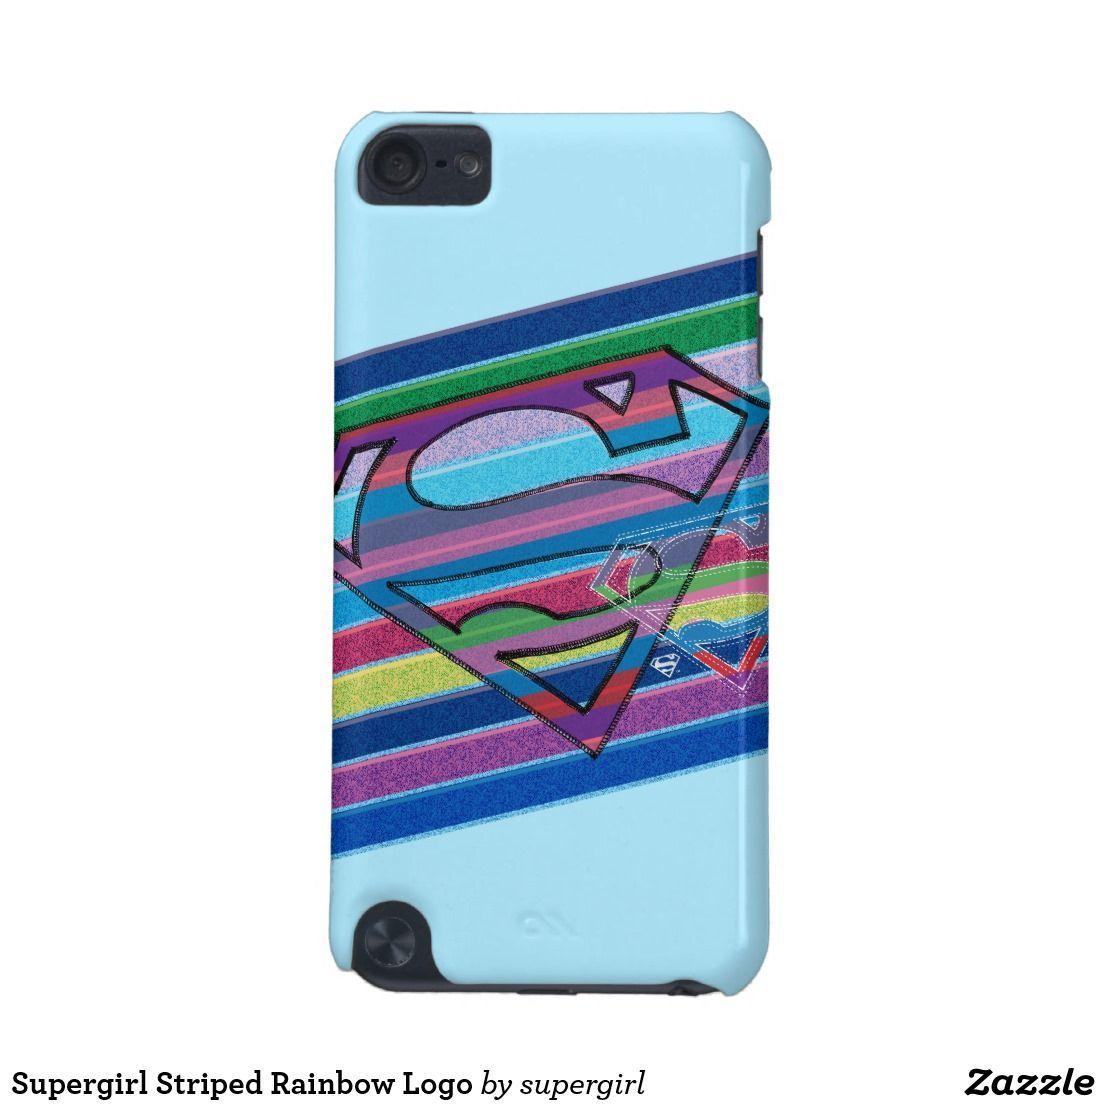 5th Comic Book Style Logo - Supergirl Striped Rainbow Logo iPod Touch (5th Generation) Cover ...